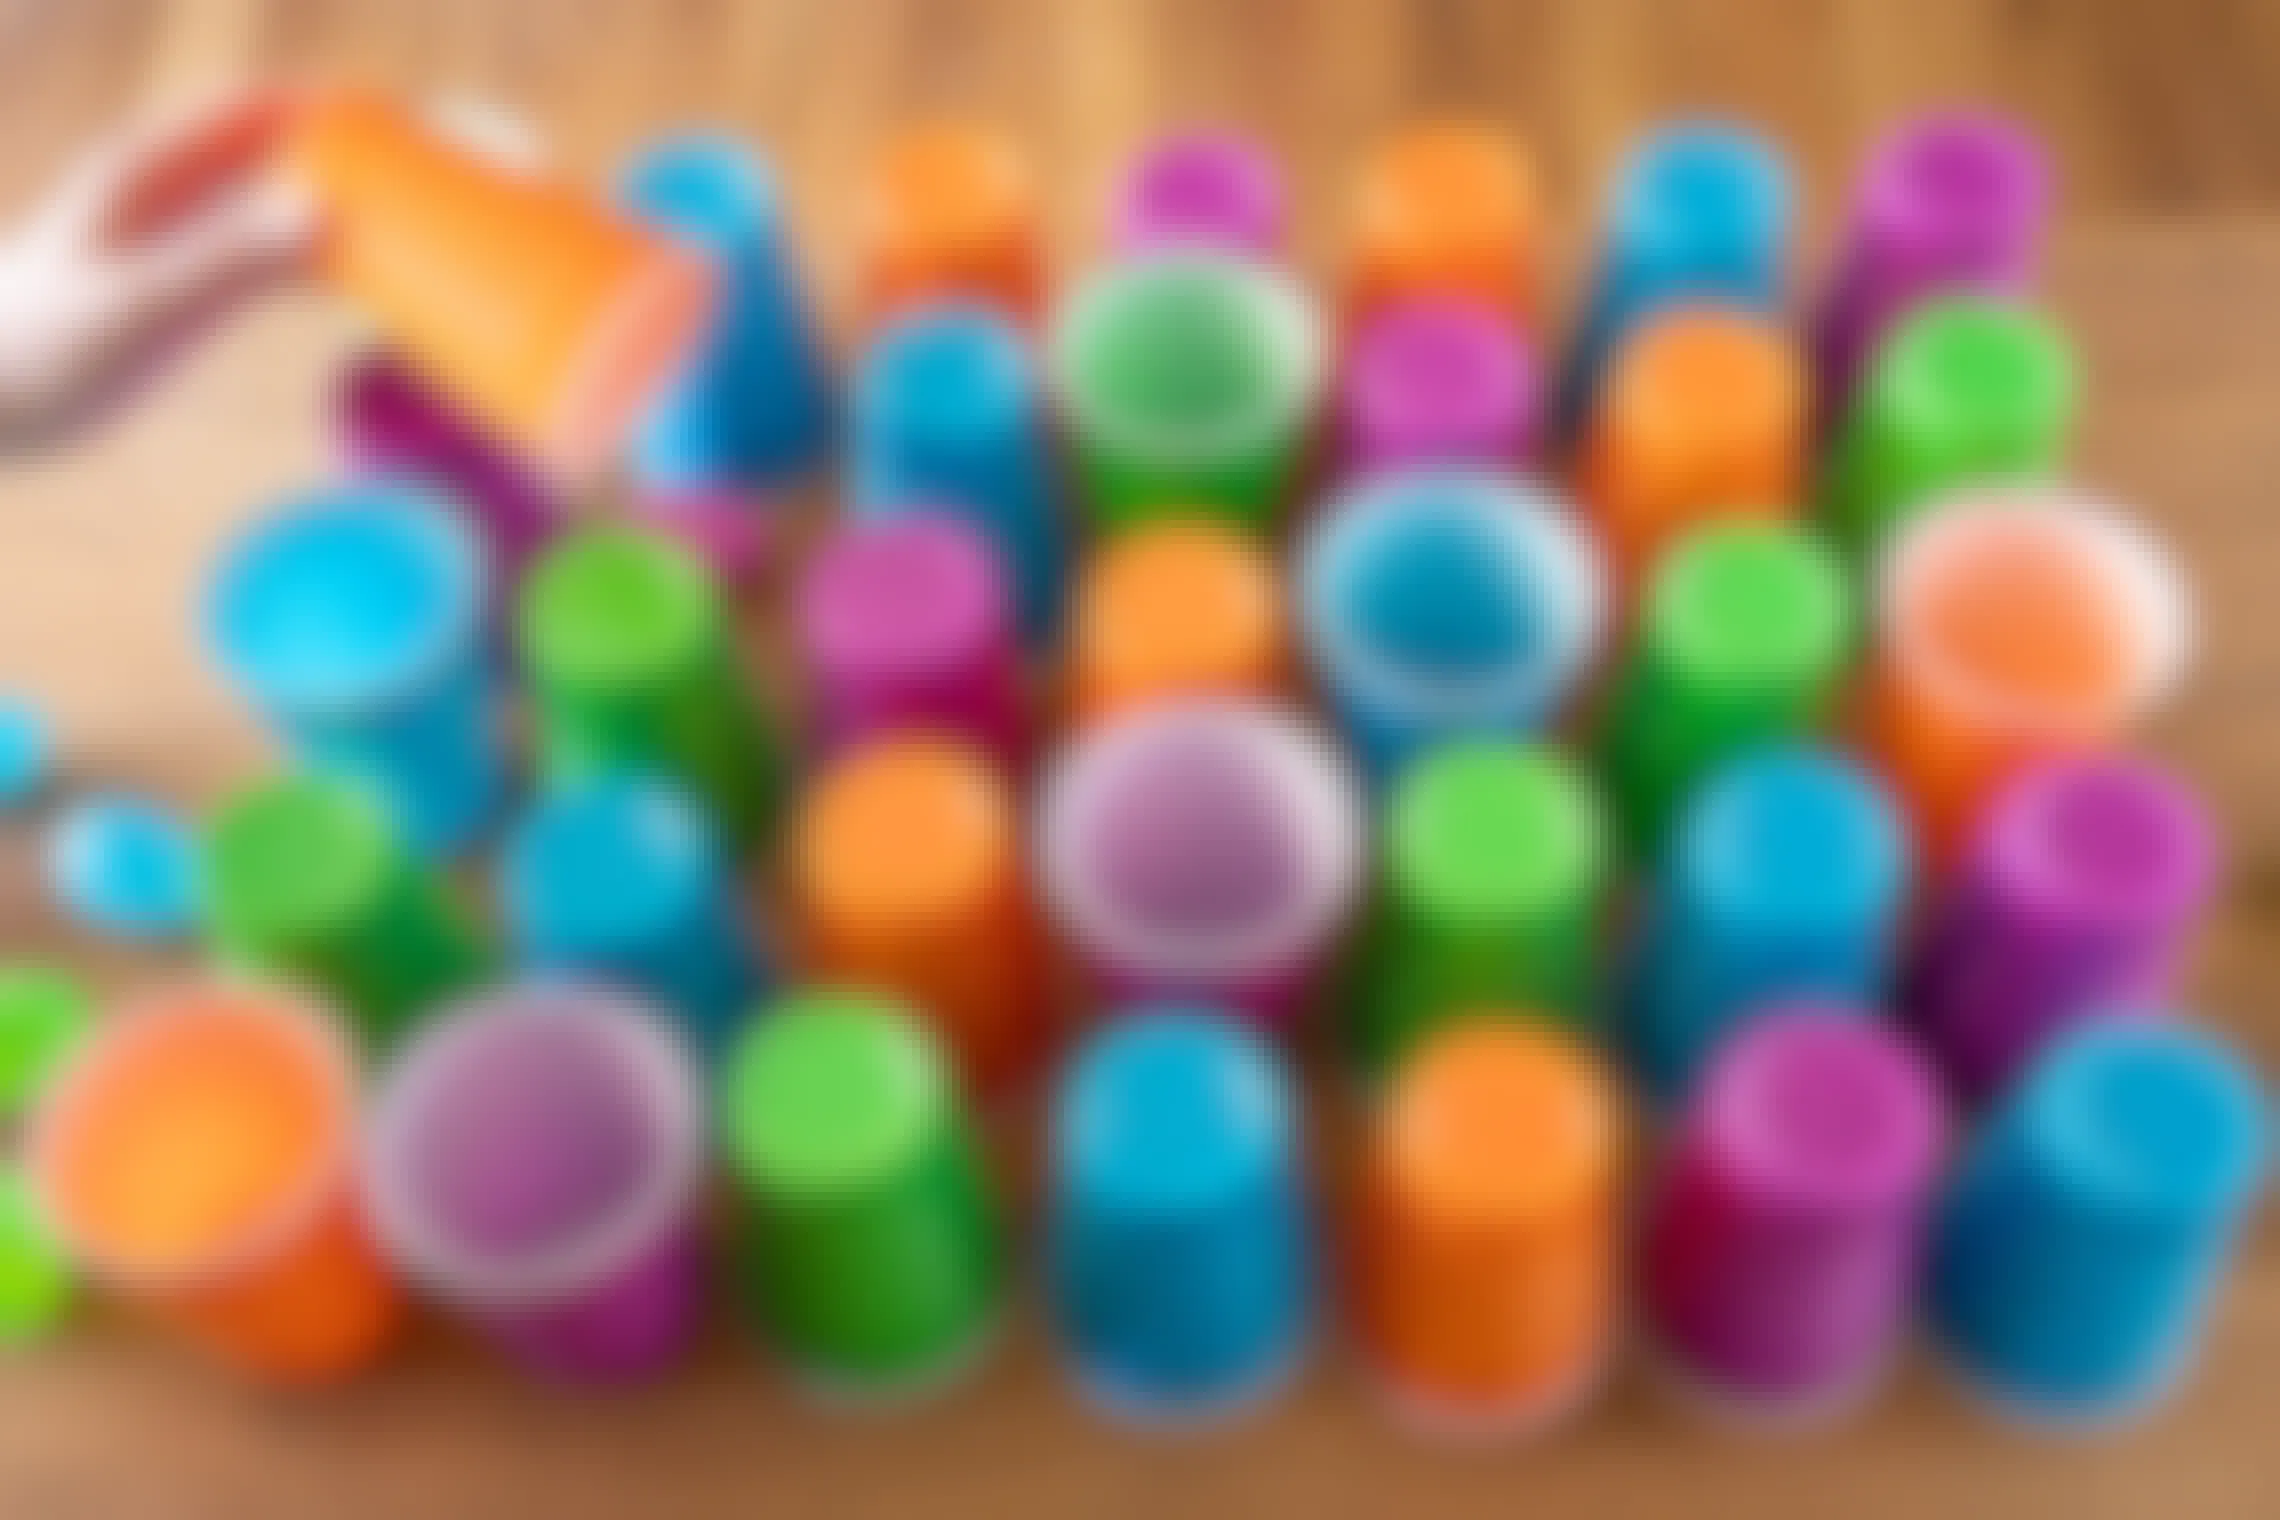 Pink, green, orange, and blue plastic cups set out on a table in a pattern with plastic Easter eggs under them and next to them.